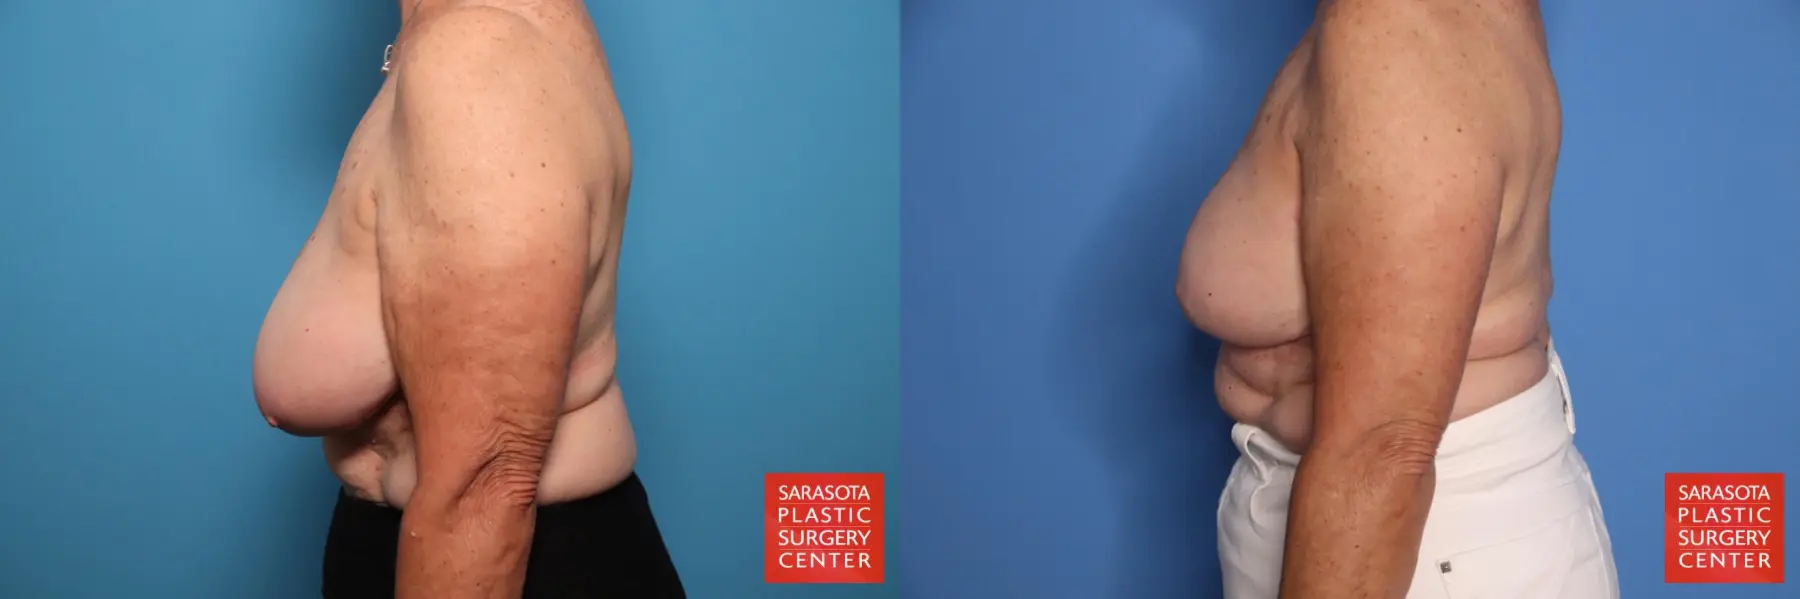 Breast Reduction: Patient 3 - Before and After 3